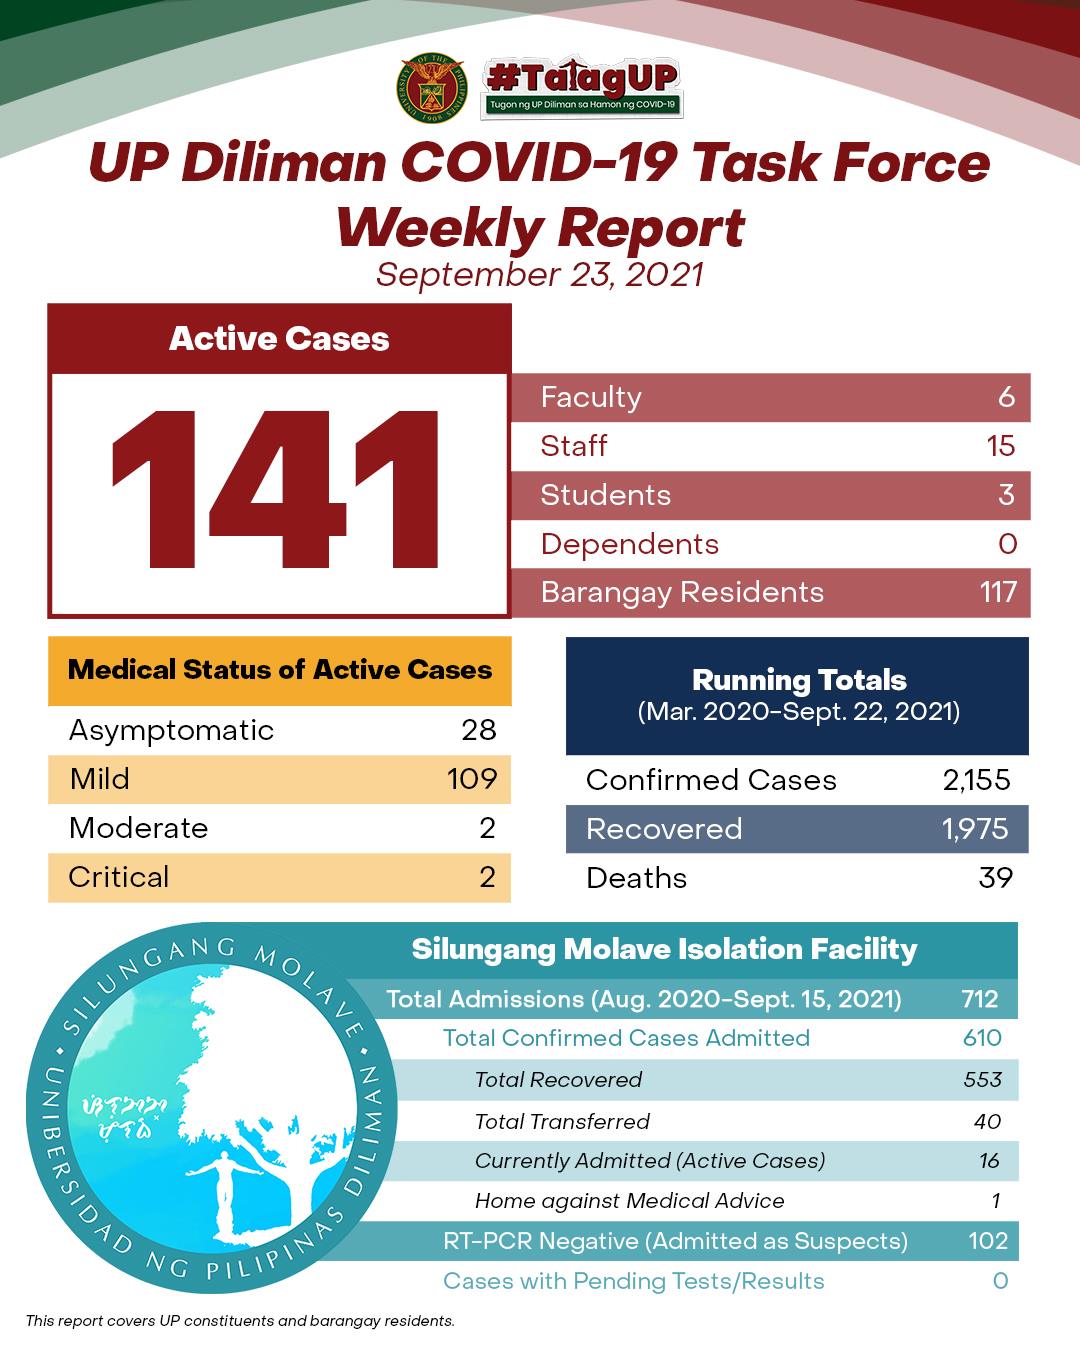 UP Diliman COVID-19 Task Force Weekly Report (September 23, 2021)